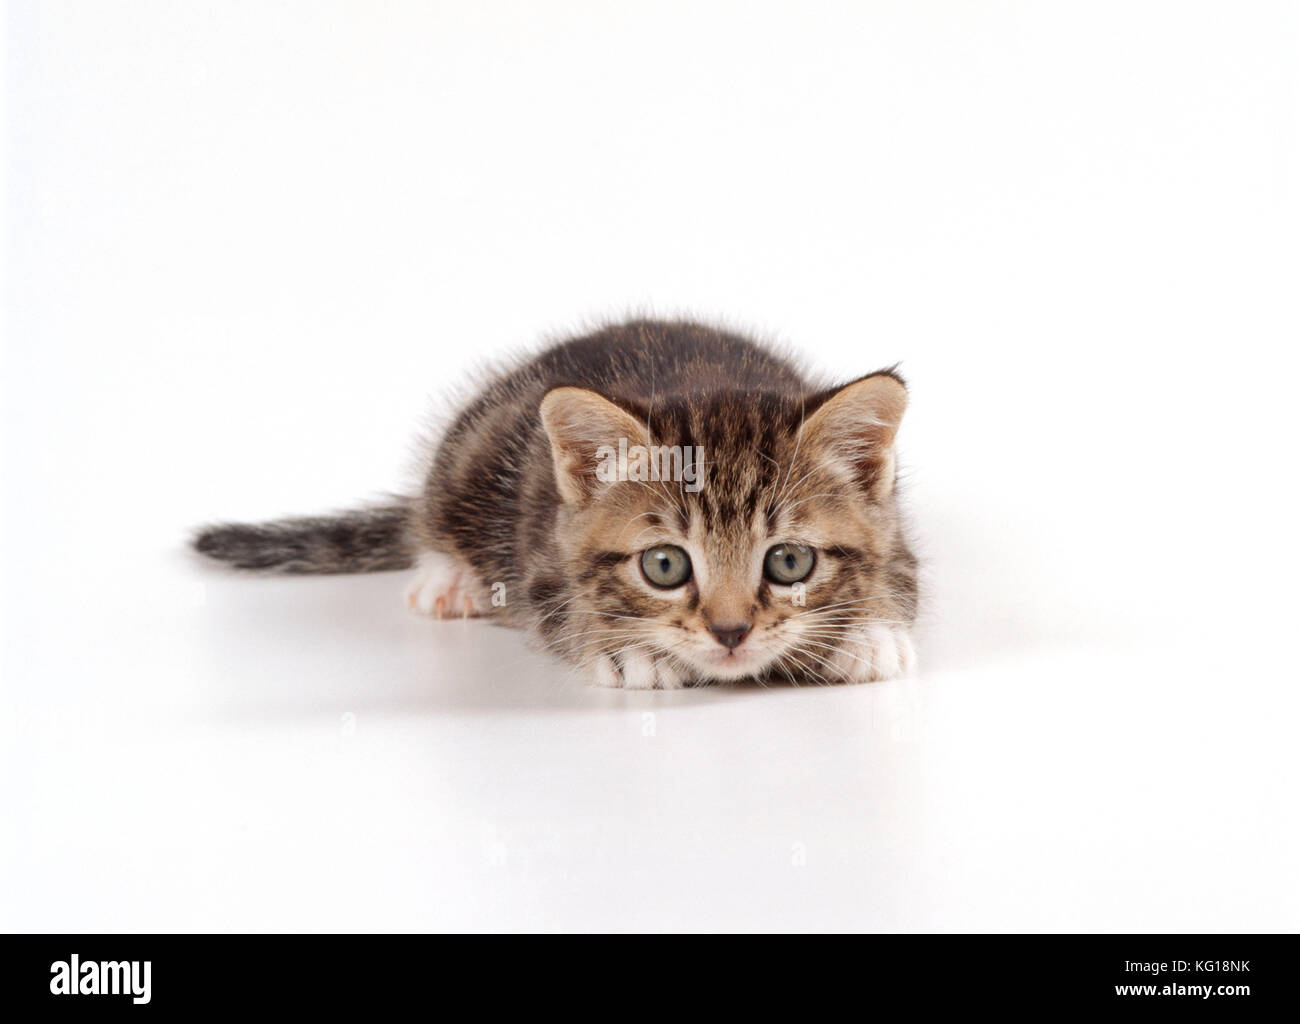 CAT - kitten in playful mood, 45 days old. against white background. Stock Photo